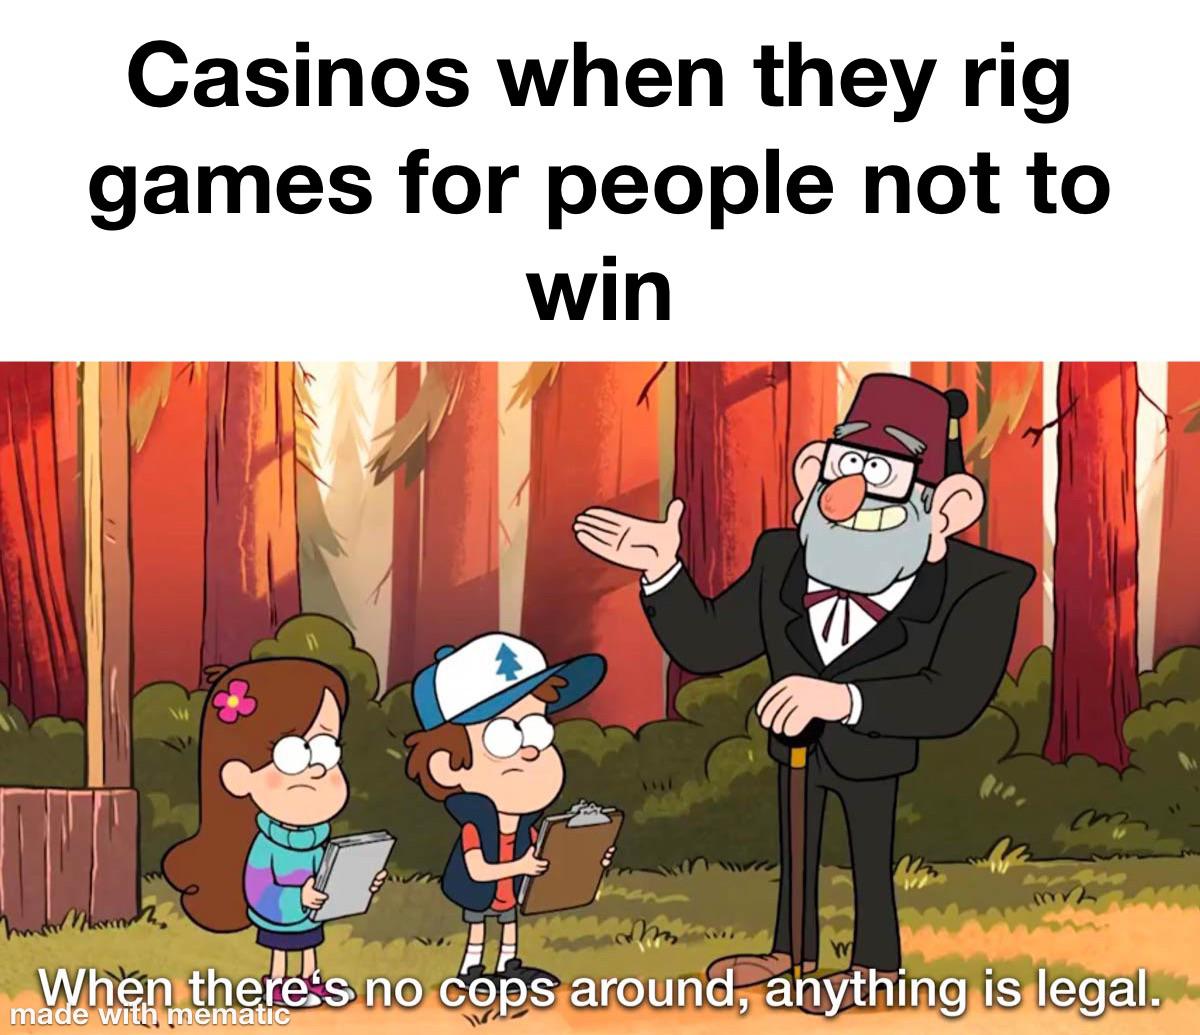 dank memes --  justin bieber quotes - Casinos when they rig games for people not to win m When there's no cops around, anything is legal.